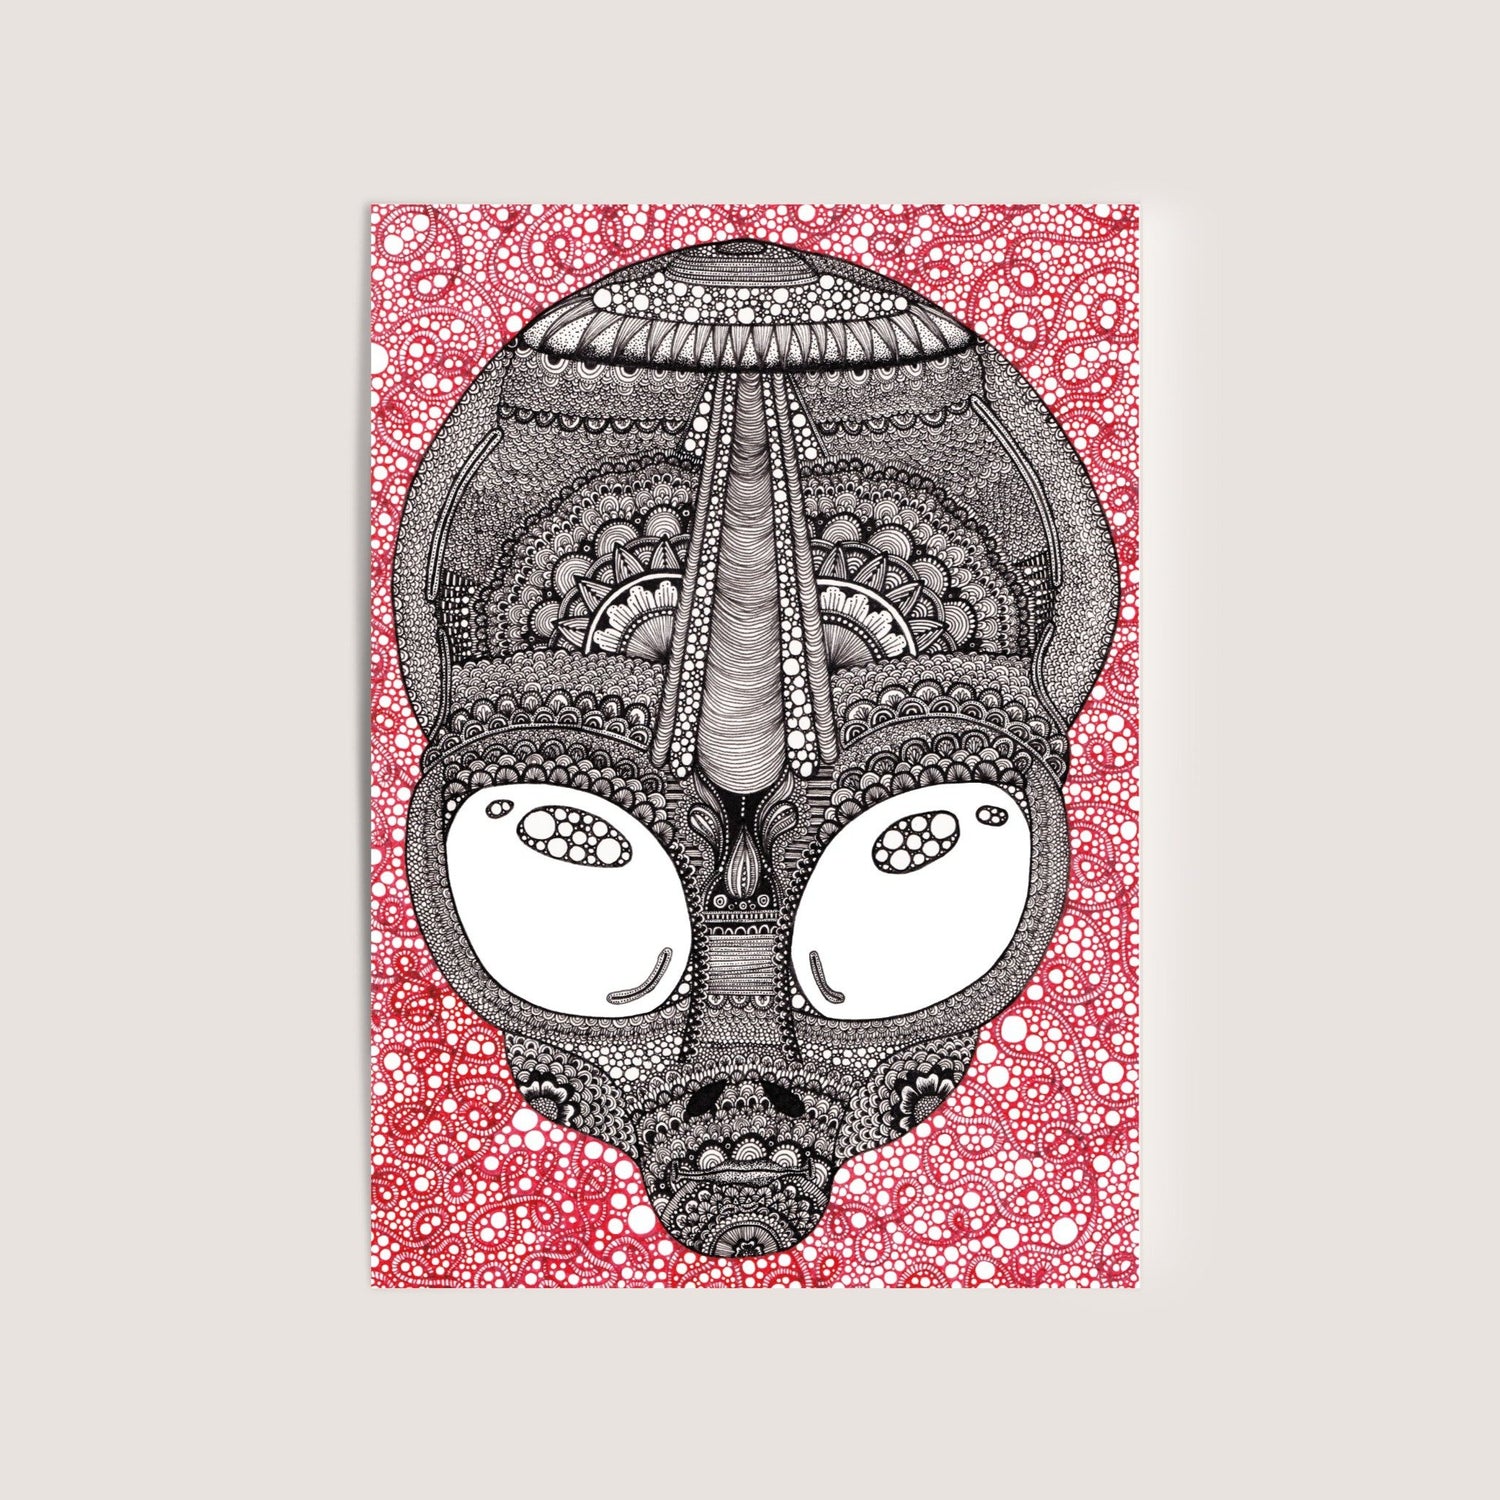 Alien Head, Extraterrestrial Mini Print Postcard. Gift for Sci-fi and Space Lovers, artwork by Jenny Pond